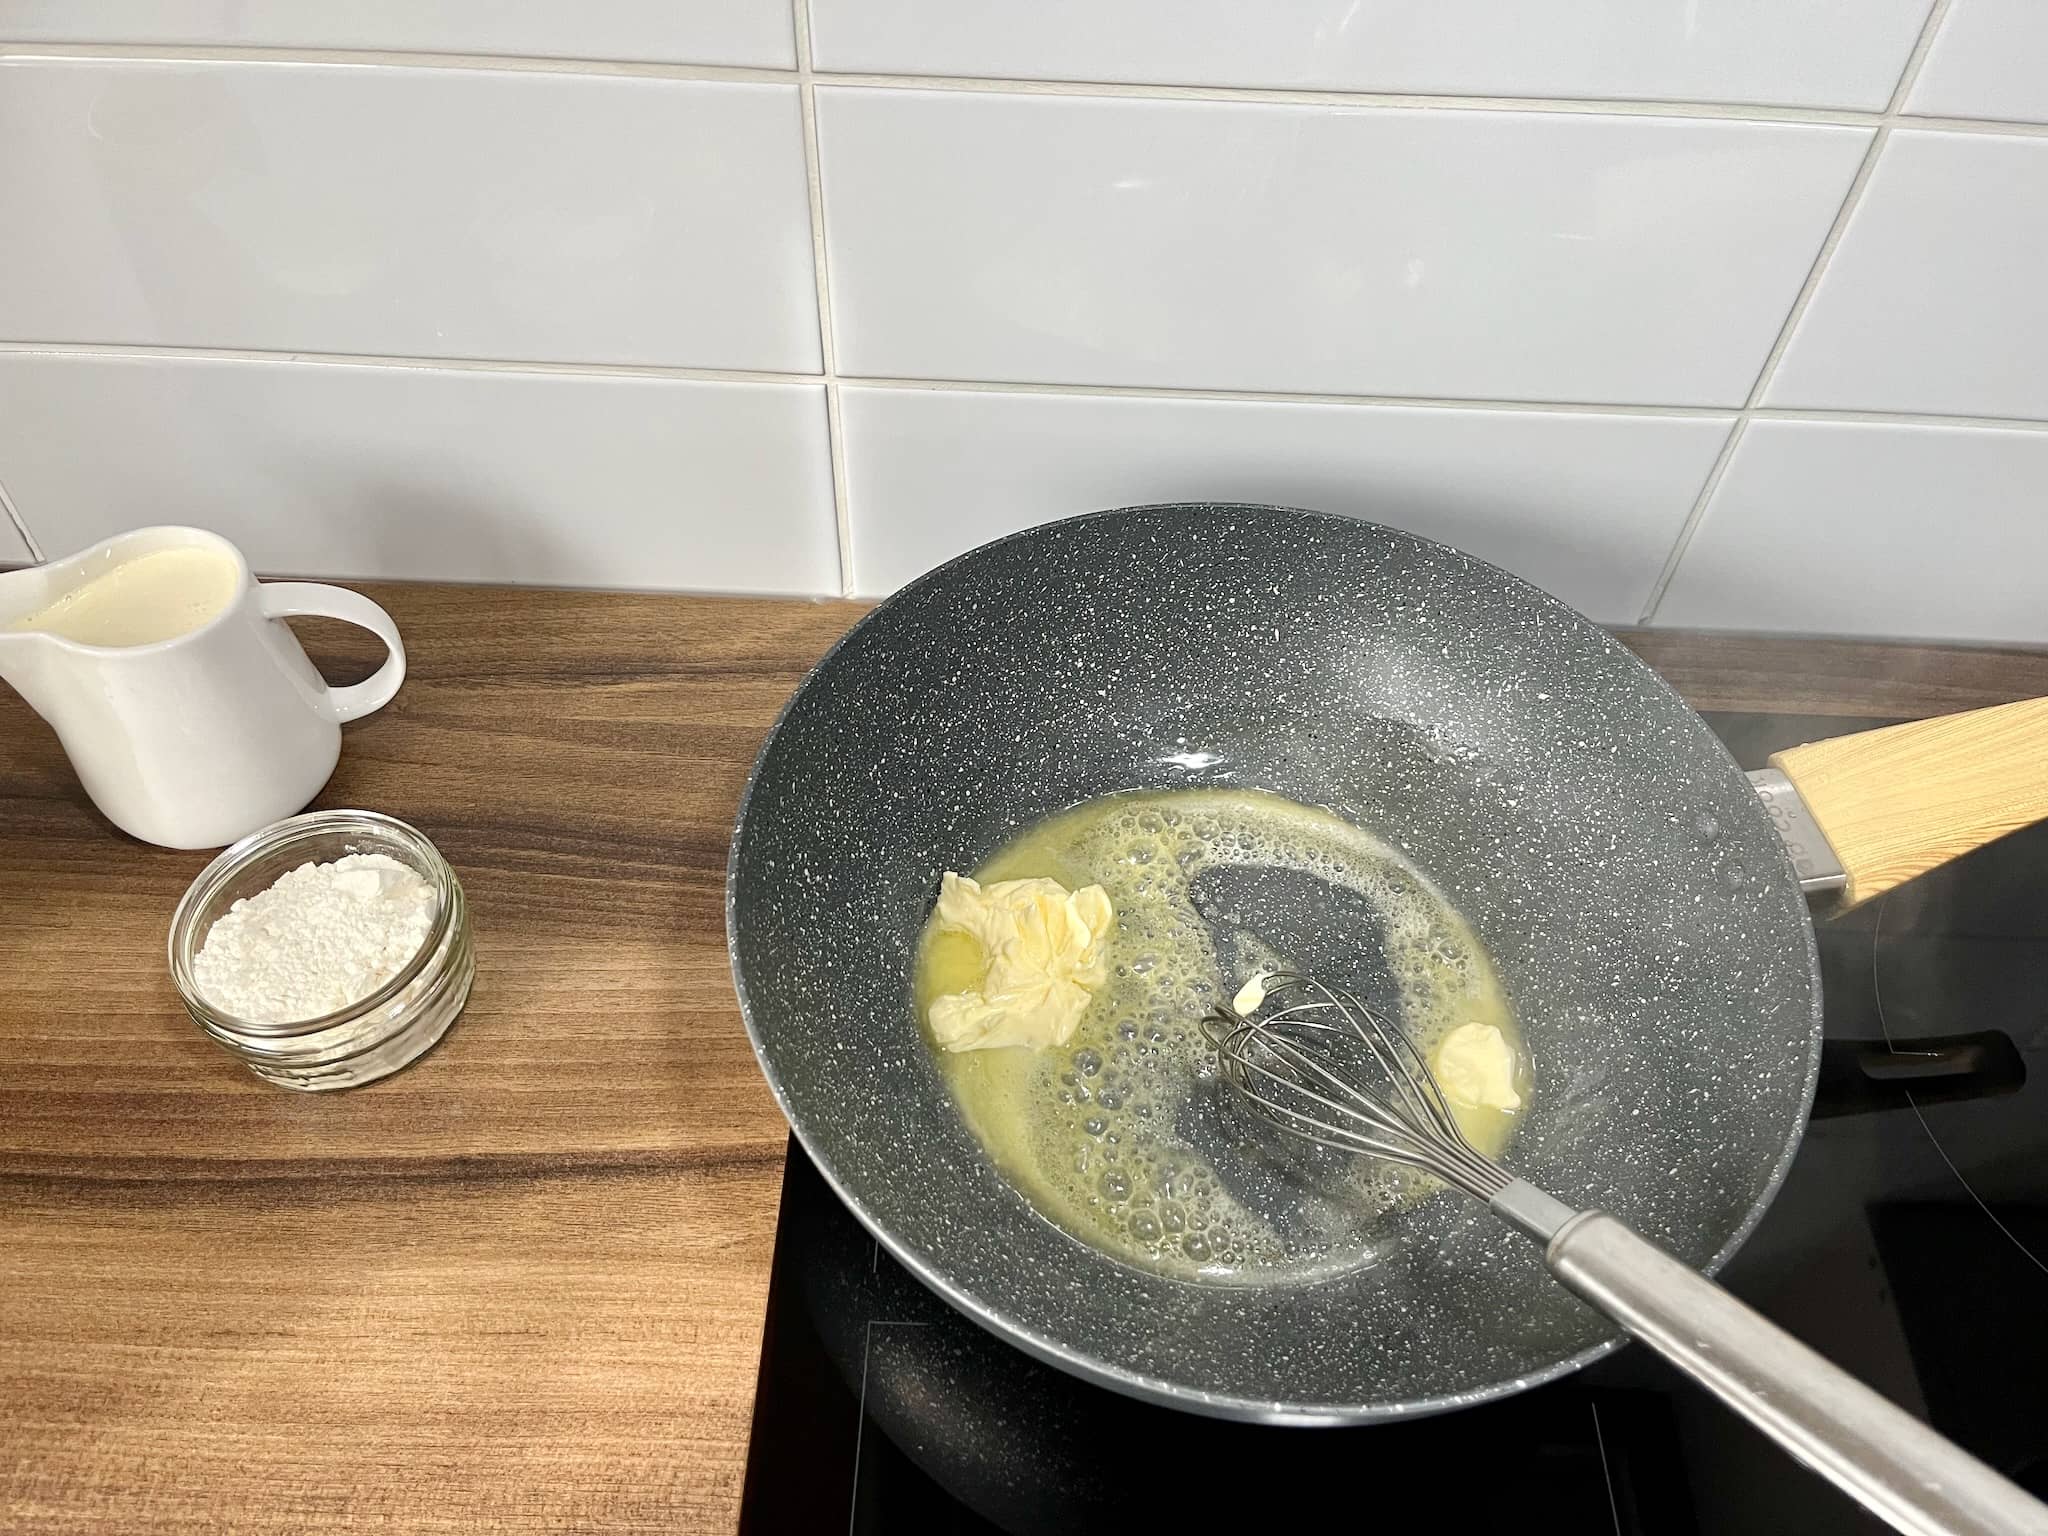 Melting butter in a pan before starting to make the sauce